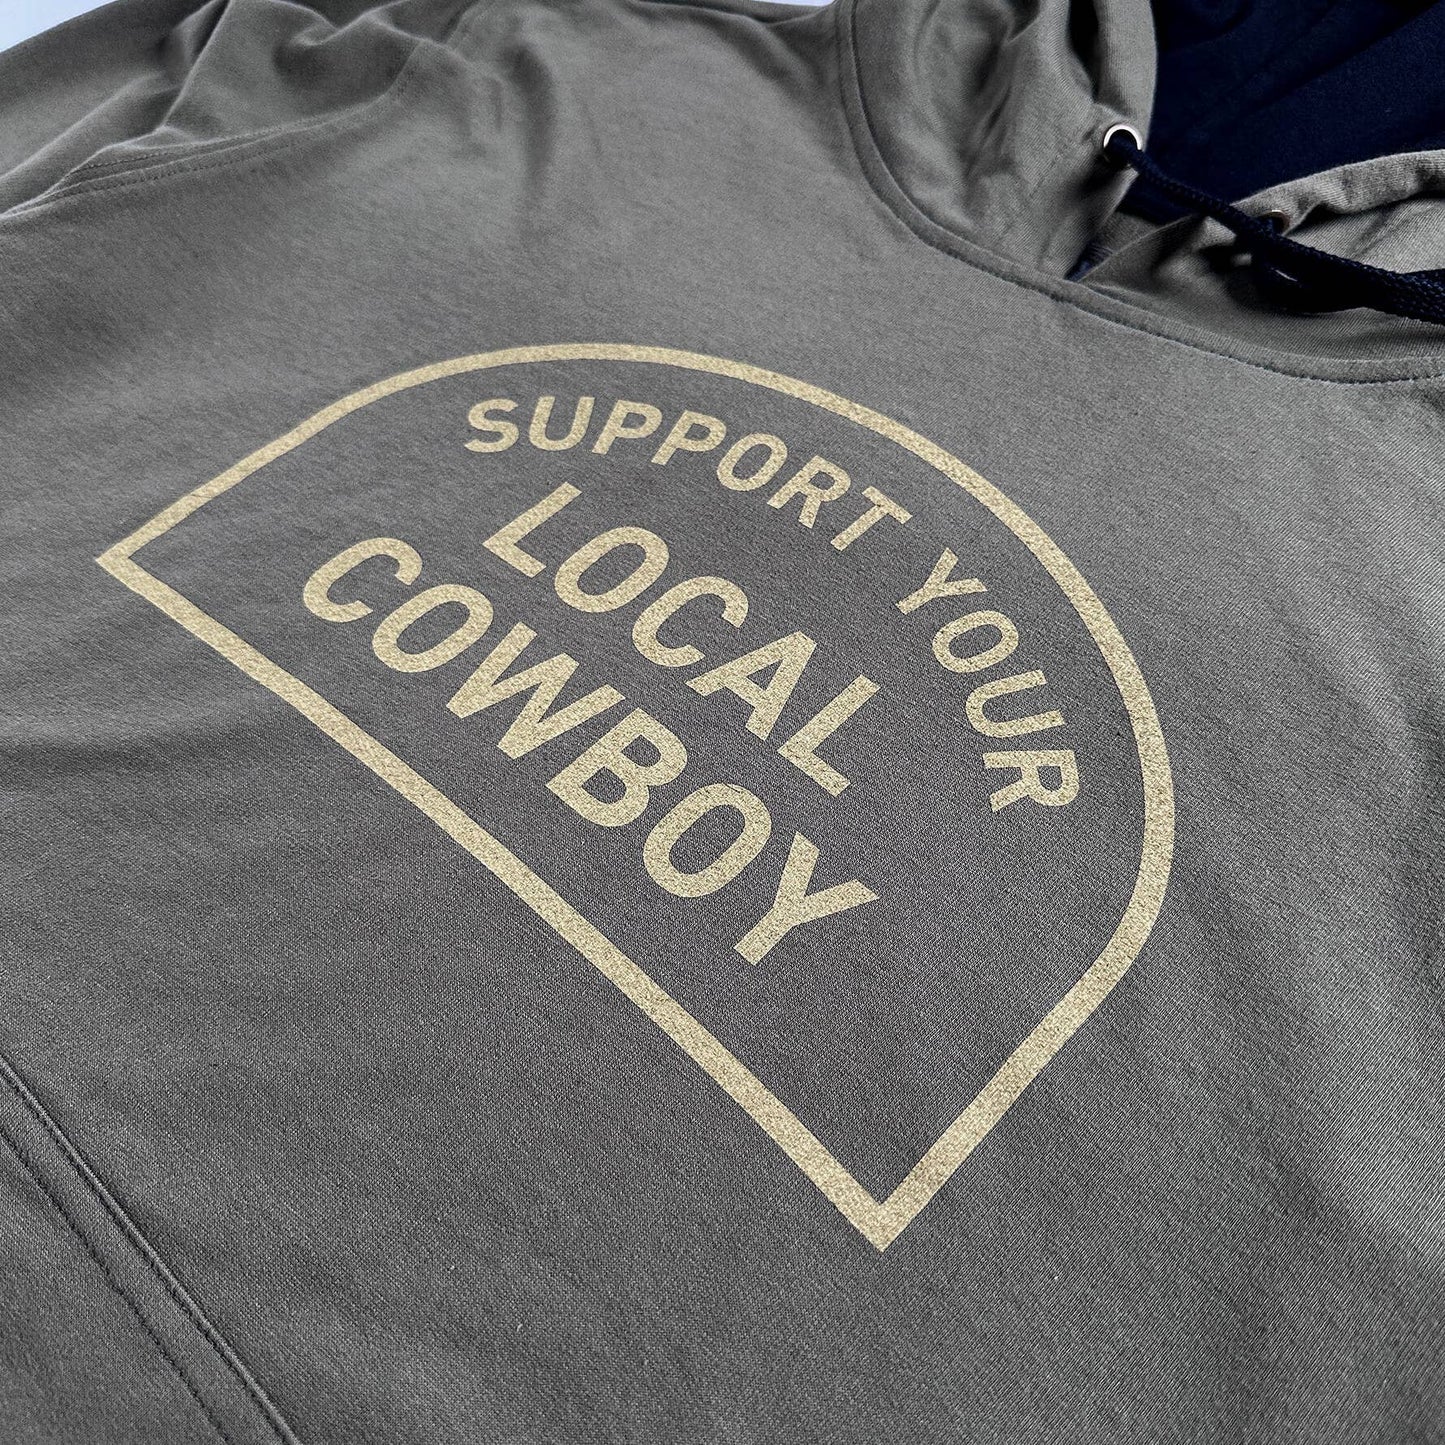 Support Your Local Cowboy Hoodie: XL / Military Green/Black